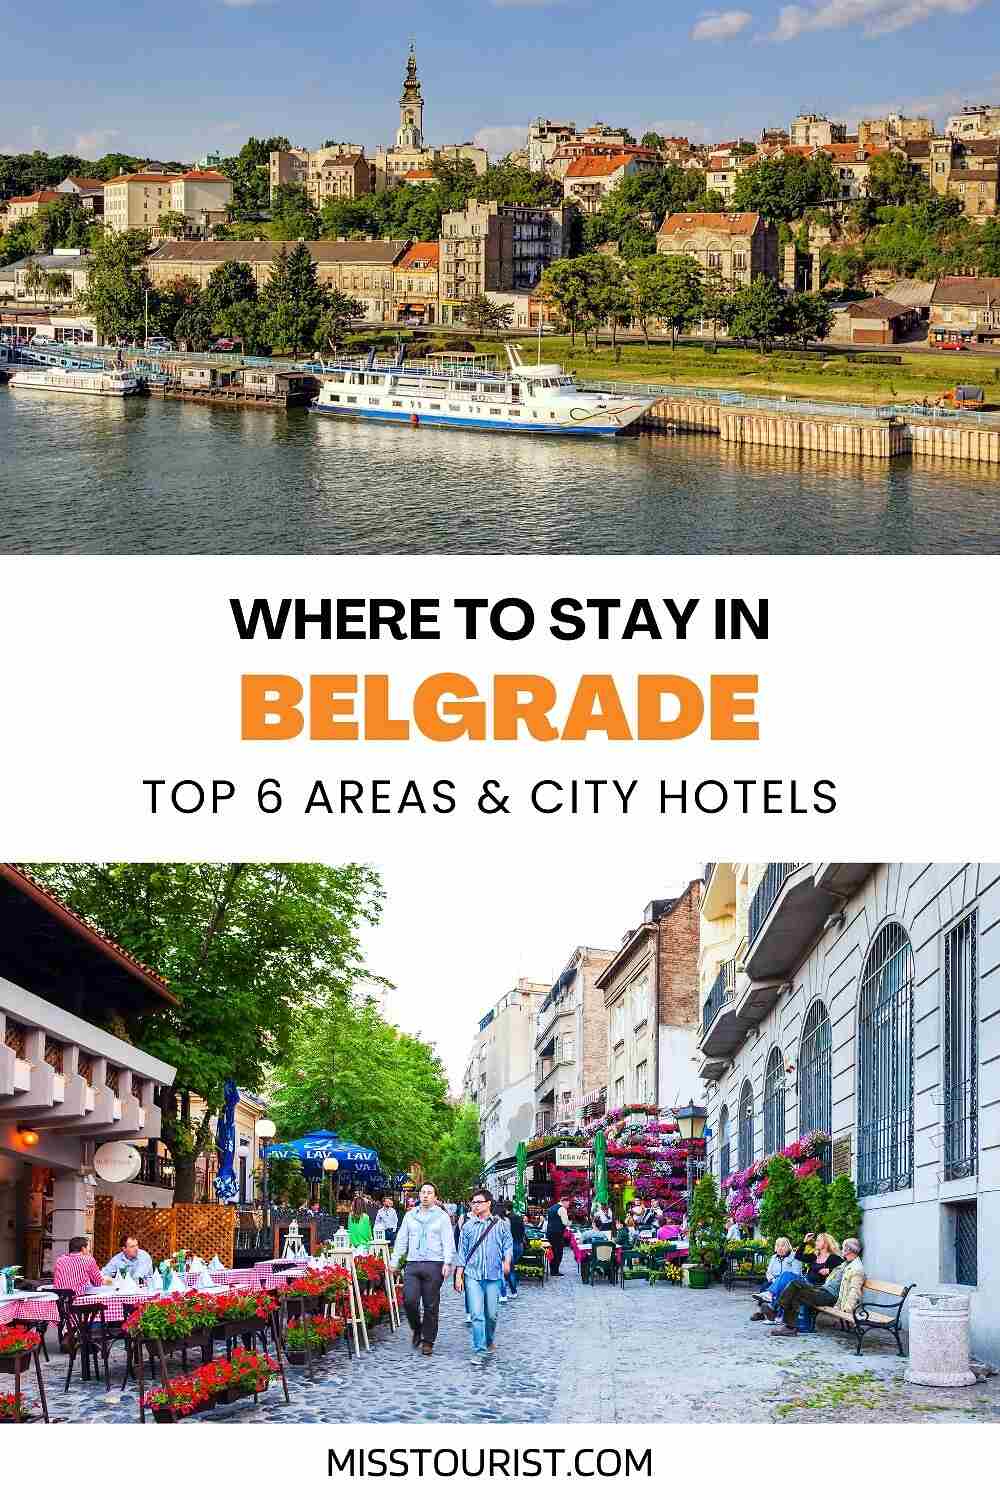 Two images of Belgrade. The top image shows a riverside cityscape with a boat. The bottom image depicts a lively street with outdoor cafes and pedestrians. Text reads: "Where to Stay in Belgrade - Top 6 Areas & City Hotels.